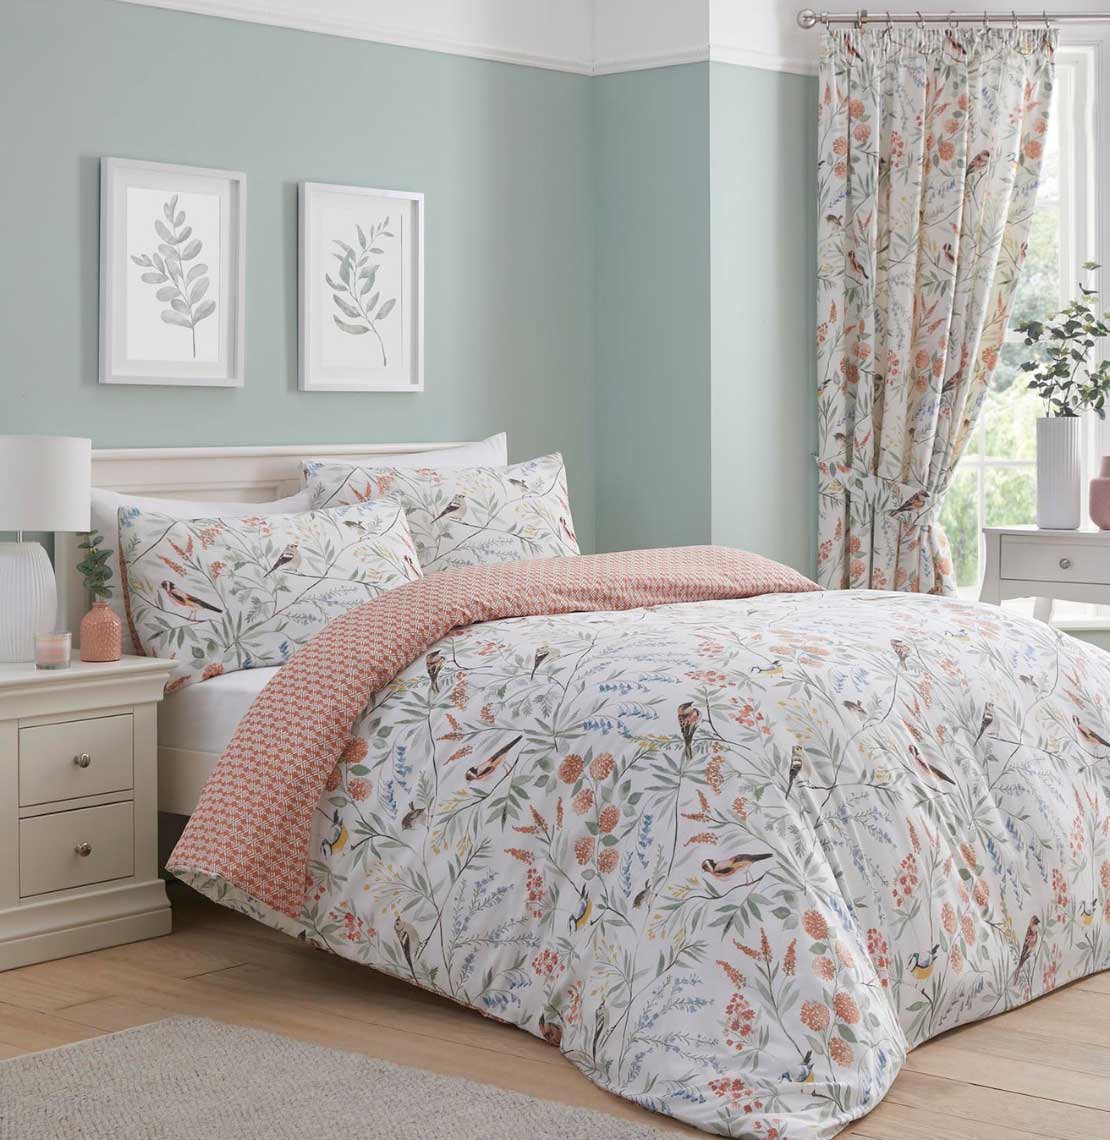 The Home Collection Bird Floral Terracotta Duvet Cover Set 1 Shaws Department Stores